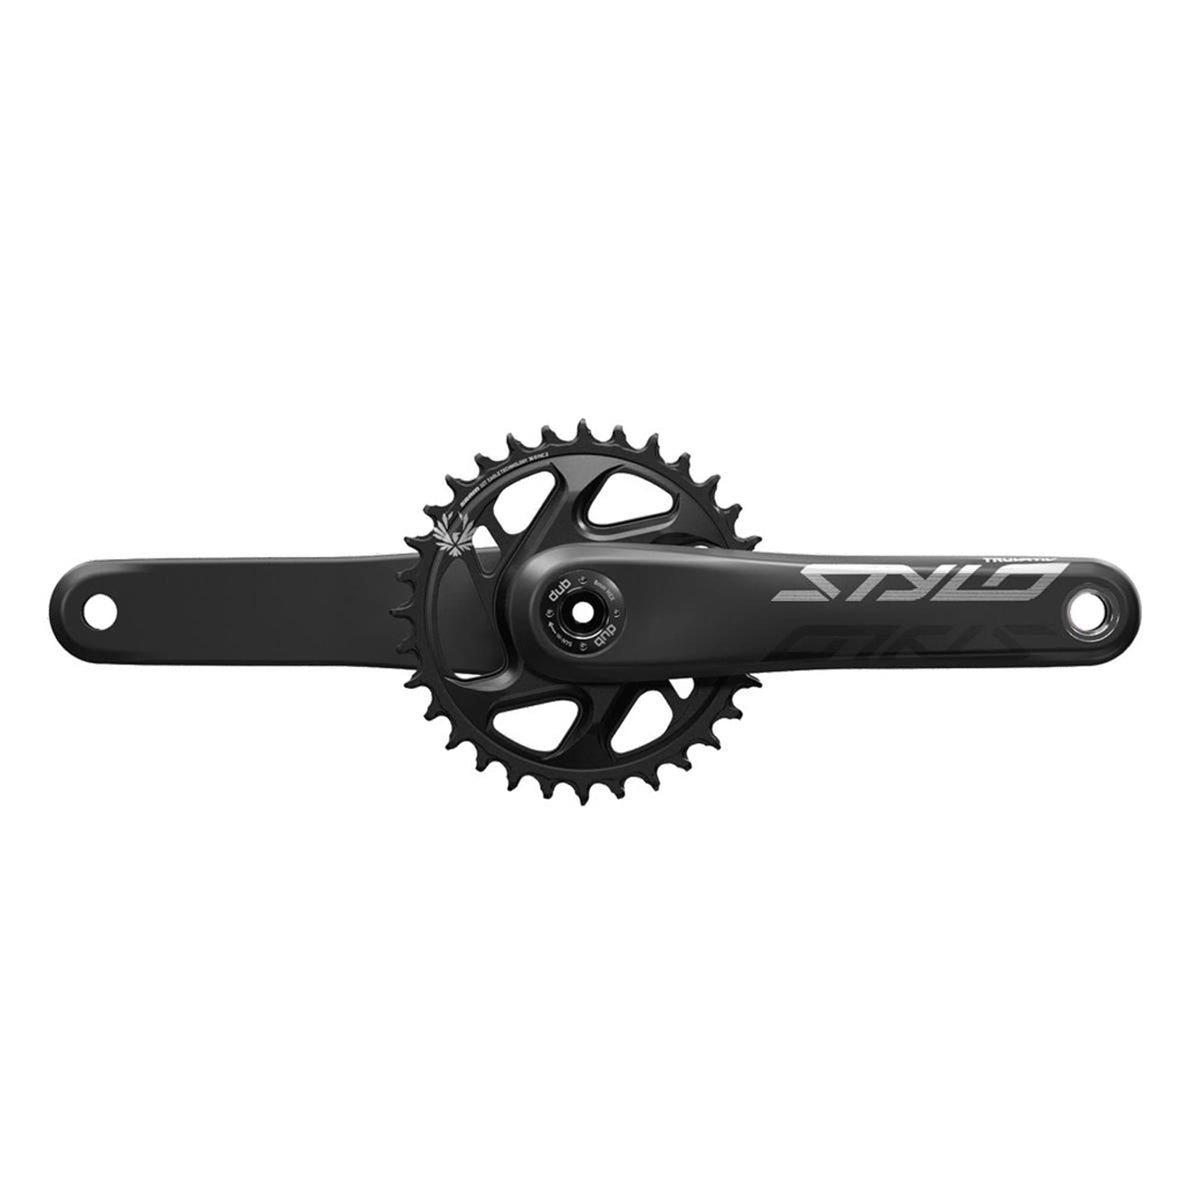 TRUVATIV CRANK STYLO CARBON EAGLE BOOST 148 DUB 12S 170 W DIRECT MOUNT 32T X-SYNC 2 CHAINRING BLACK (DUB CUPS/BEARINGS NOT INCLUDED): BLACK 170MM